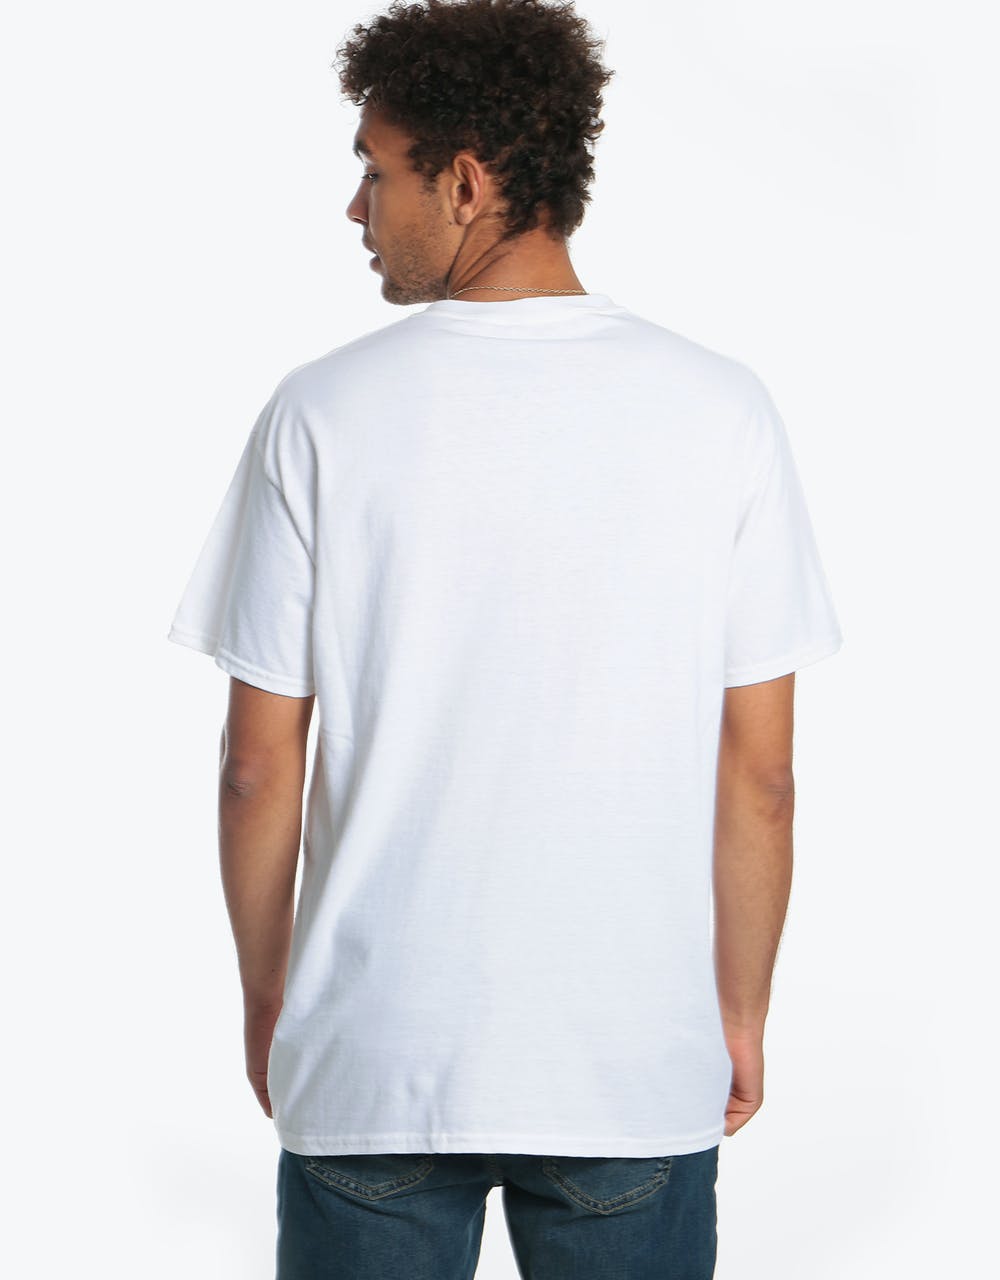 Route One Bang T-Shirt - White